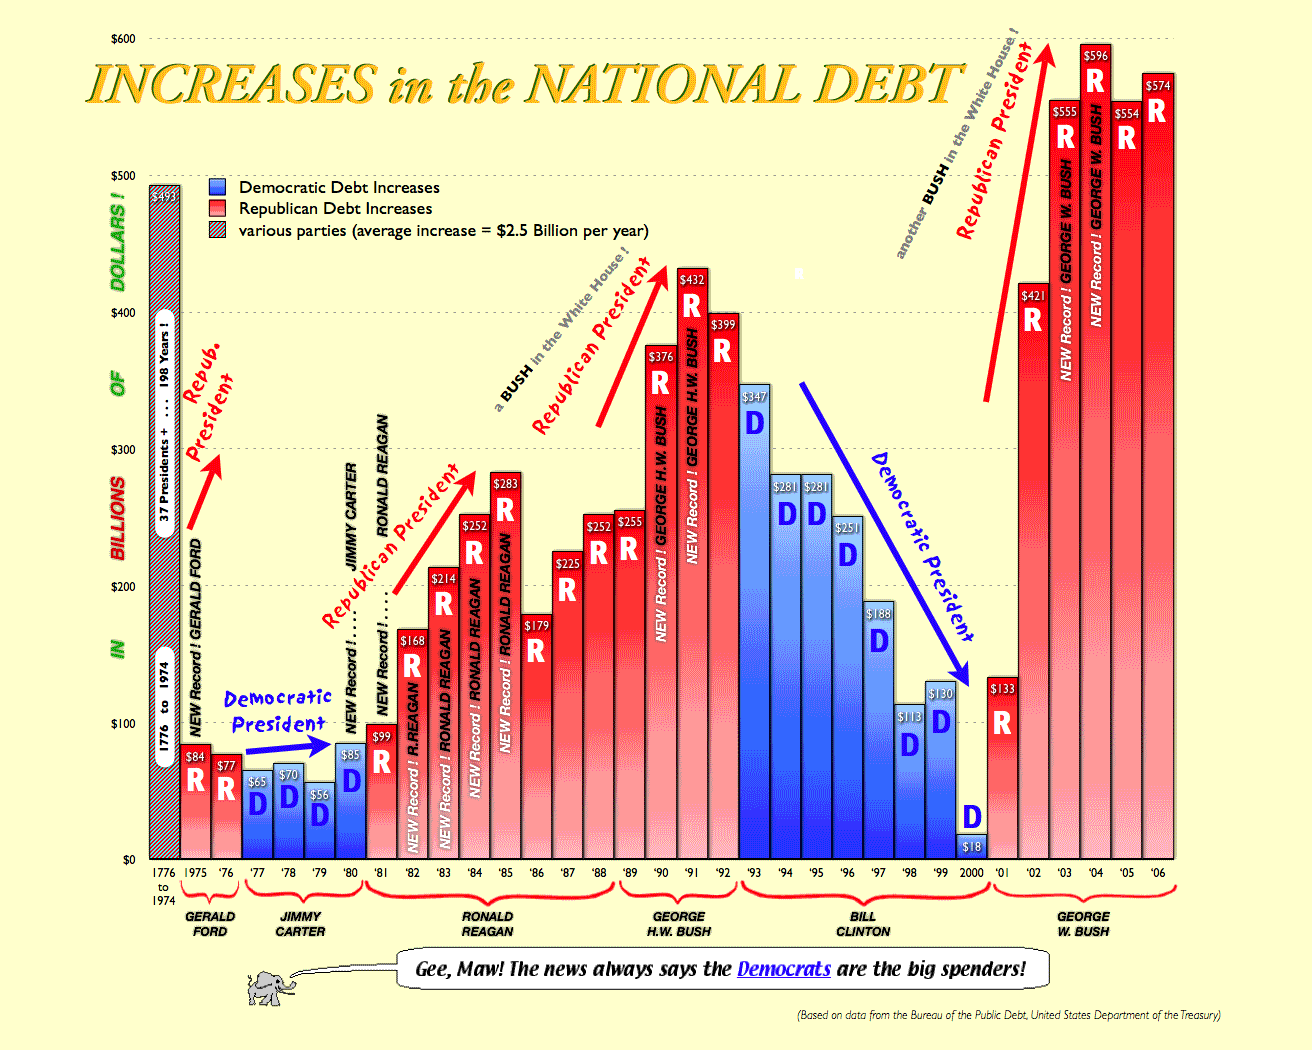 Click here to go to site of chart.